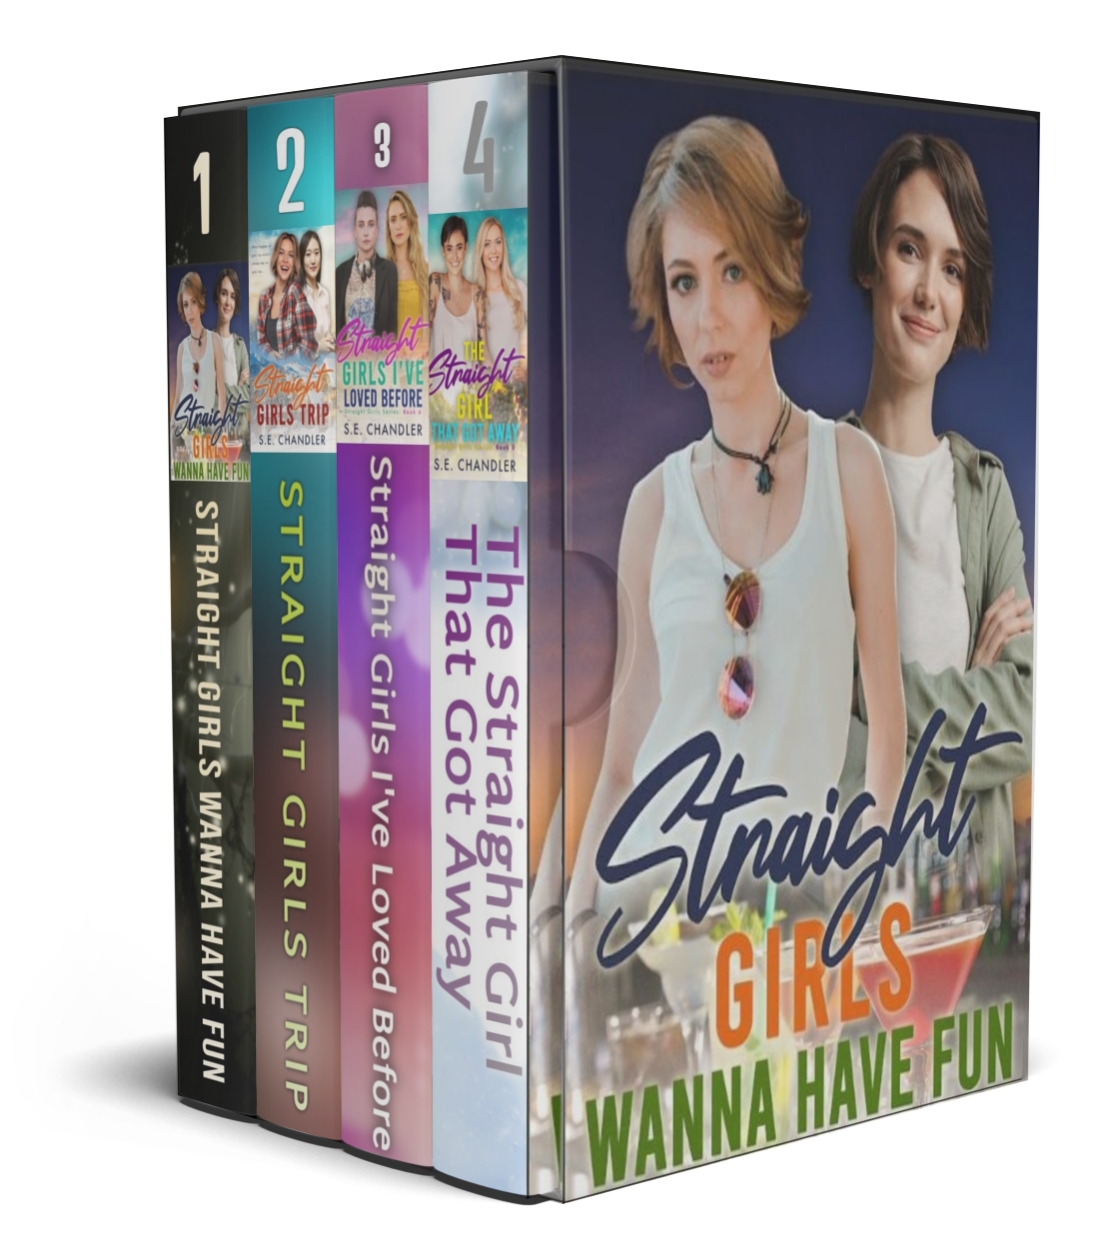 Box set of four books in Straight Girls Series